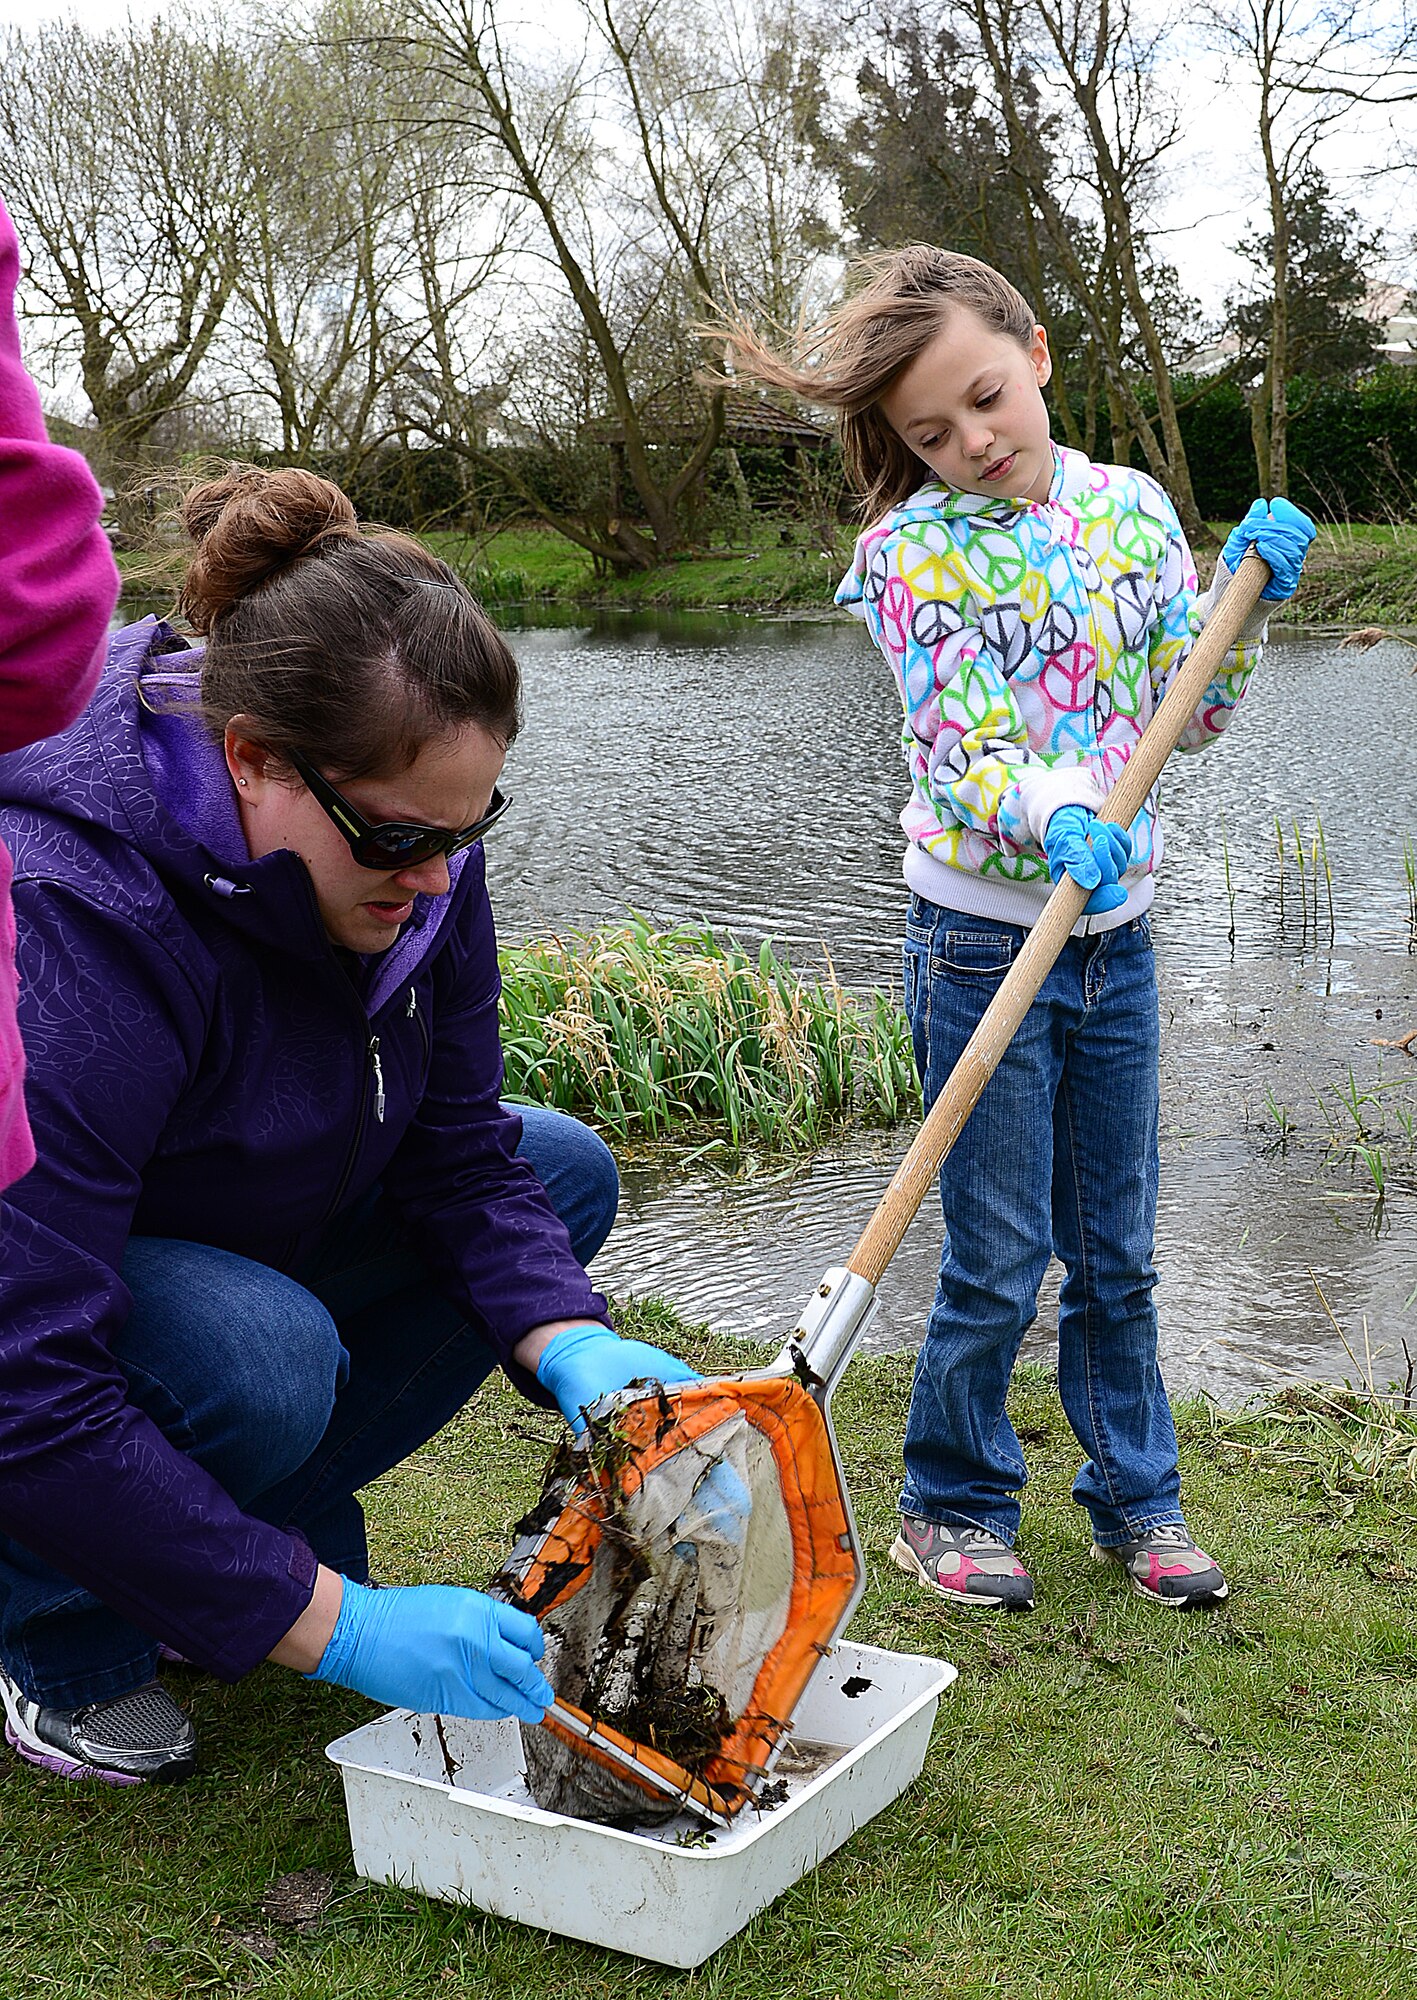 ROYAL AIR FORCE LAKENHEATH, England—Krisa Engel (left), Department of Defense third grade teacher, helps Alyssa Ransted, daughter of Tech. Sgt. Steven Ransted, 100th Maintenance Squadron, RAF Mildenhall, empty her nature net into a bucket at Defenders Park during a pond dipping activity for Earth Week, April 18, 2013. Earth Day, which is on April 22, is an annual event held worldwide, showing support for environmental protection. (U.S. Air Force photo by Staff Sgt. Stephanie Mancha)